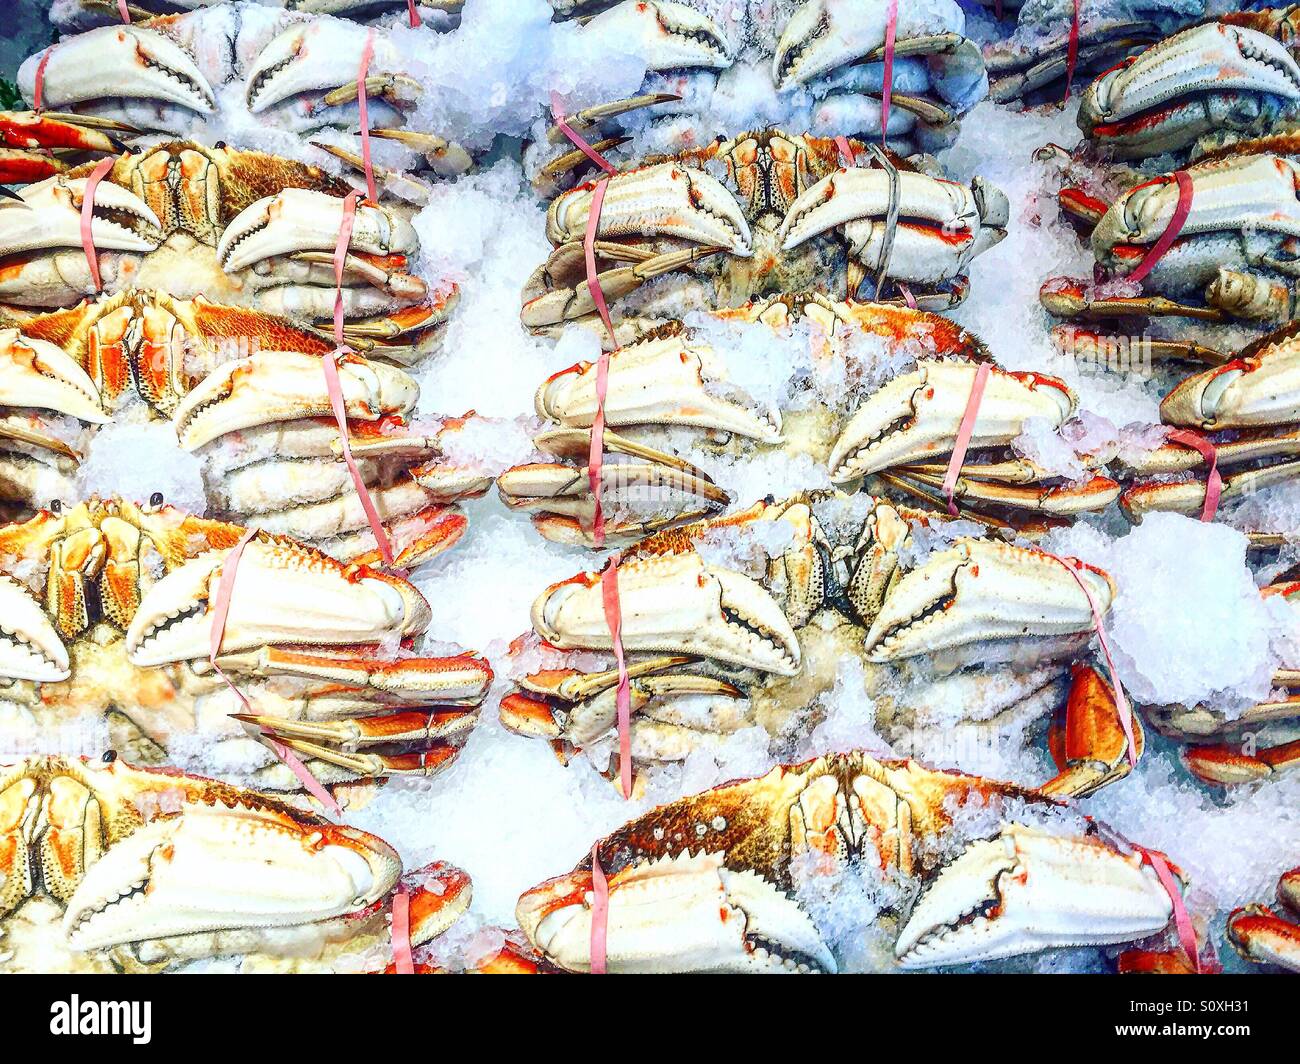 Crabs at the market Stock Photo